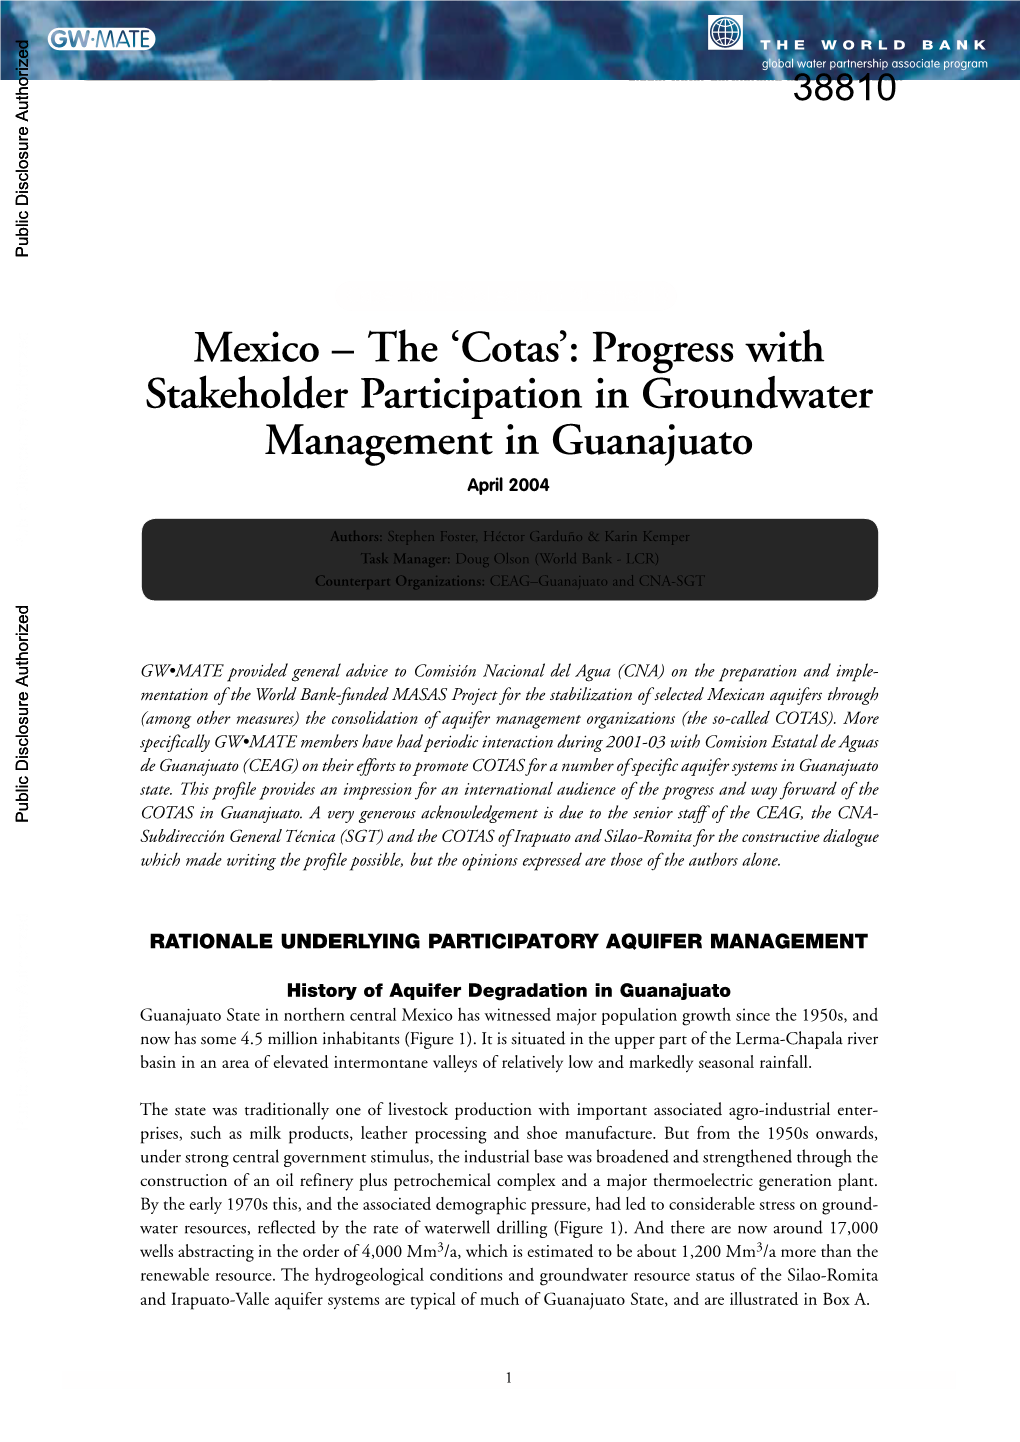 Cotas’: Progress with Stakeholder Participation in Groundwater Management in Guanajuato April 2004